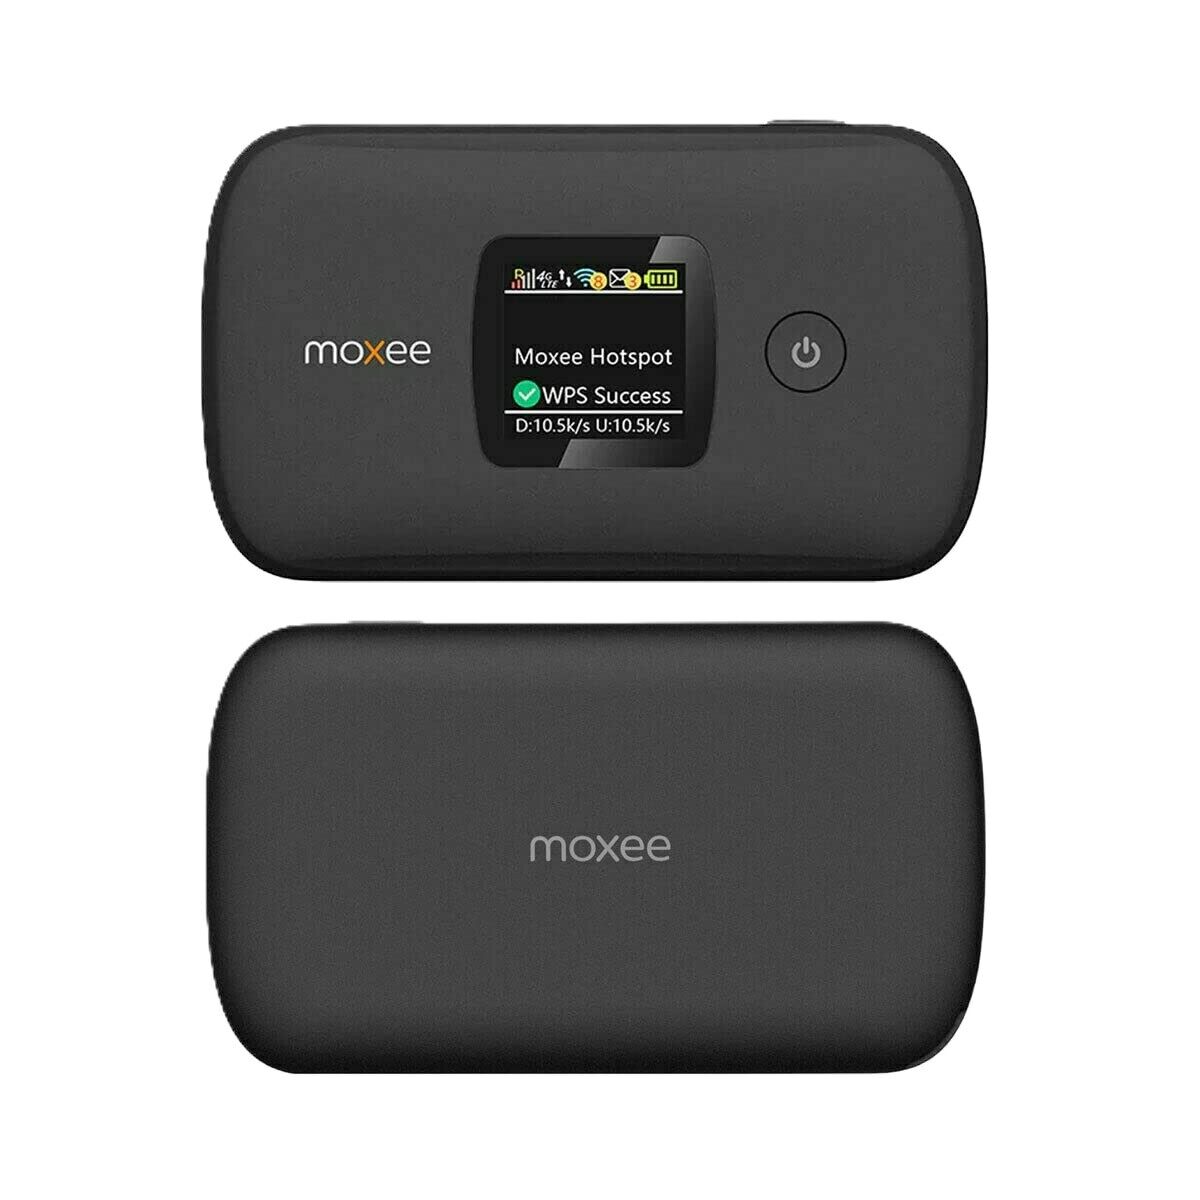 AT&T Prepaid MOXEE K779 4G LTE Mobile Hotspot - Black - 256MB 1200 Mbps - 4G